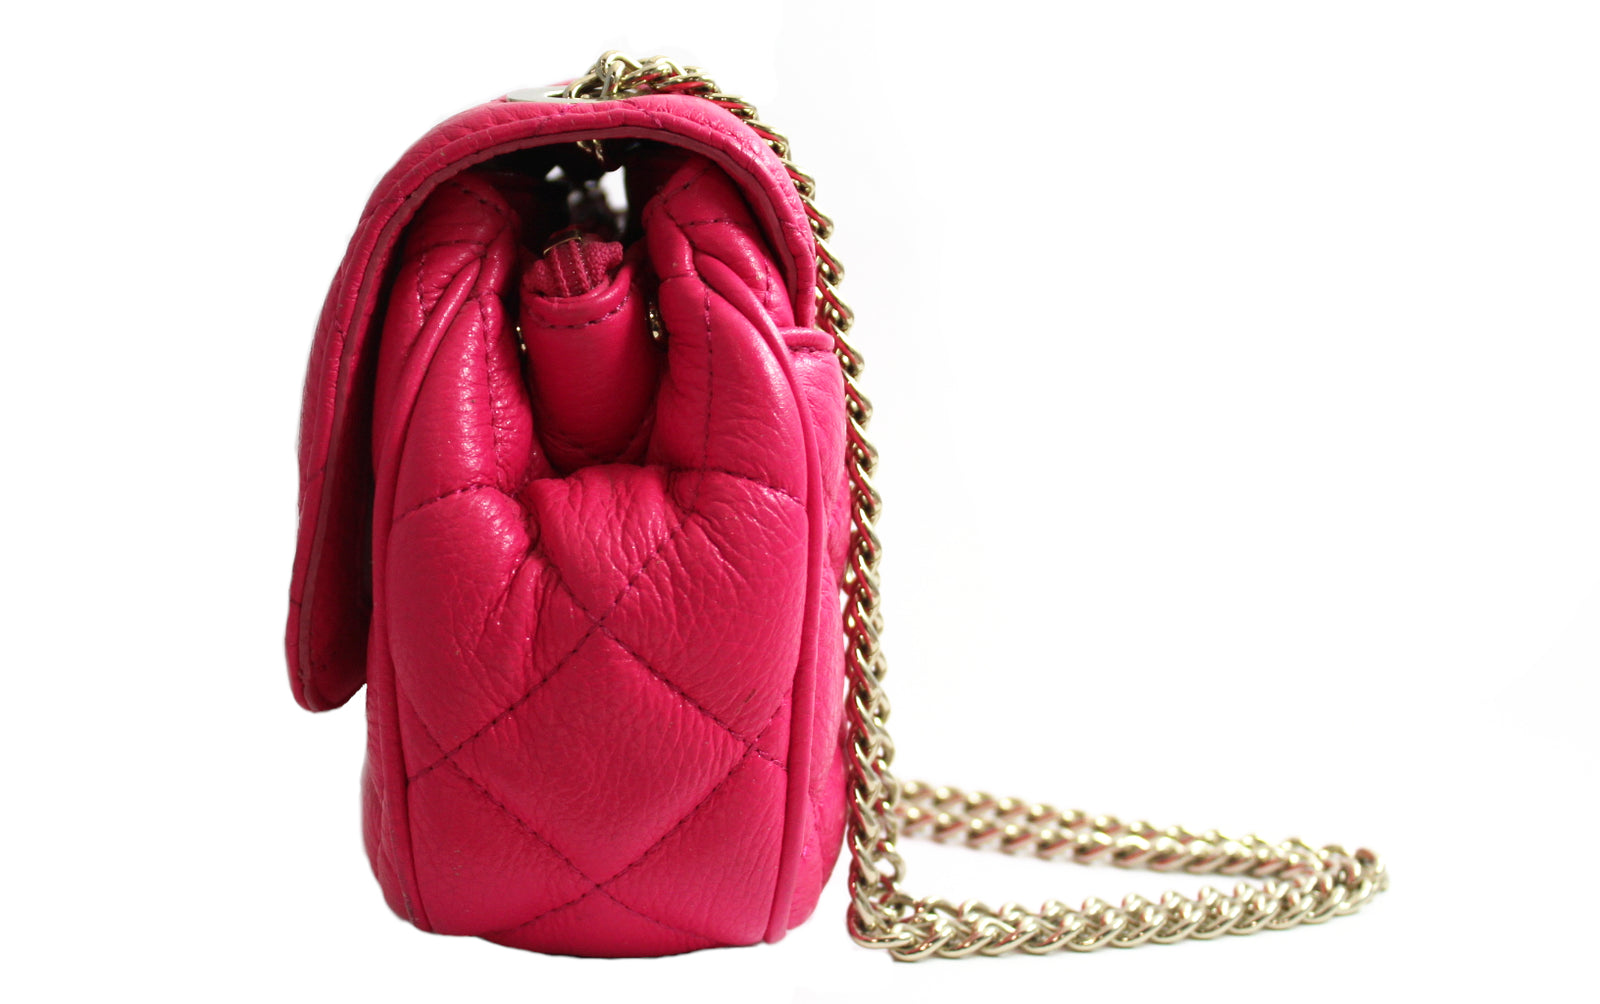 Quilted Pink Leather Convertible Bag